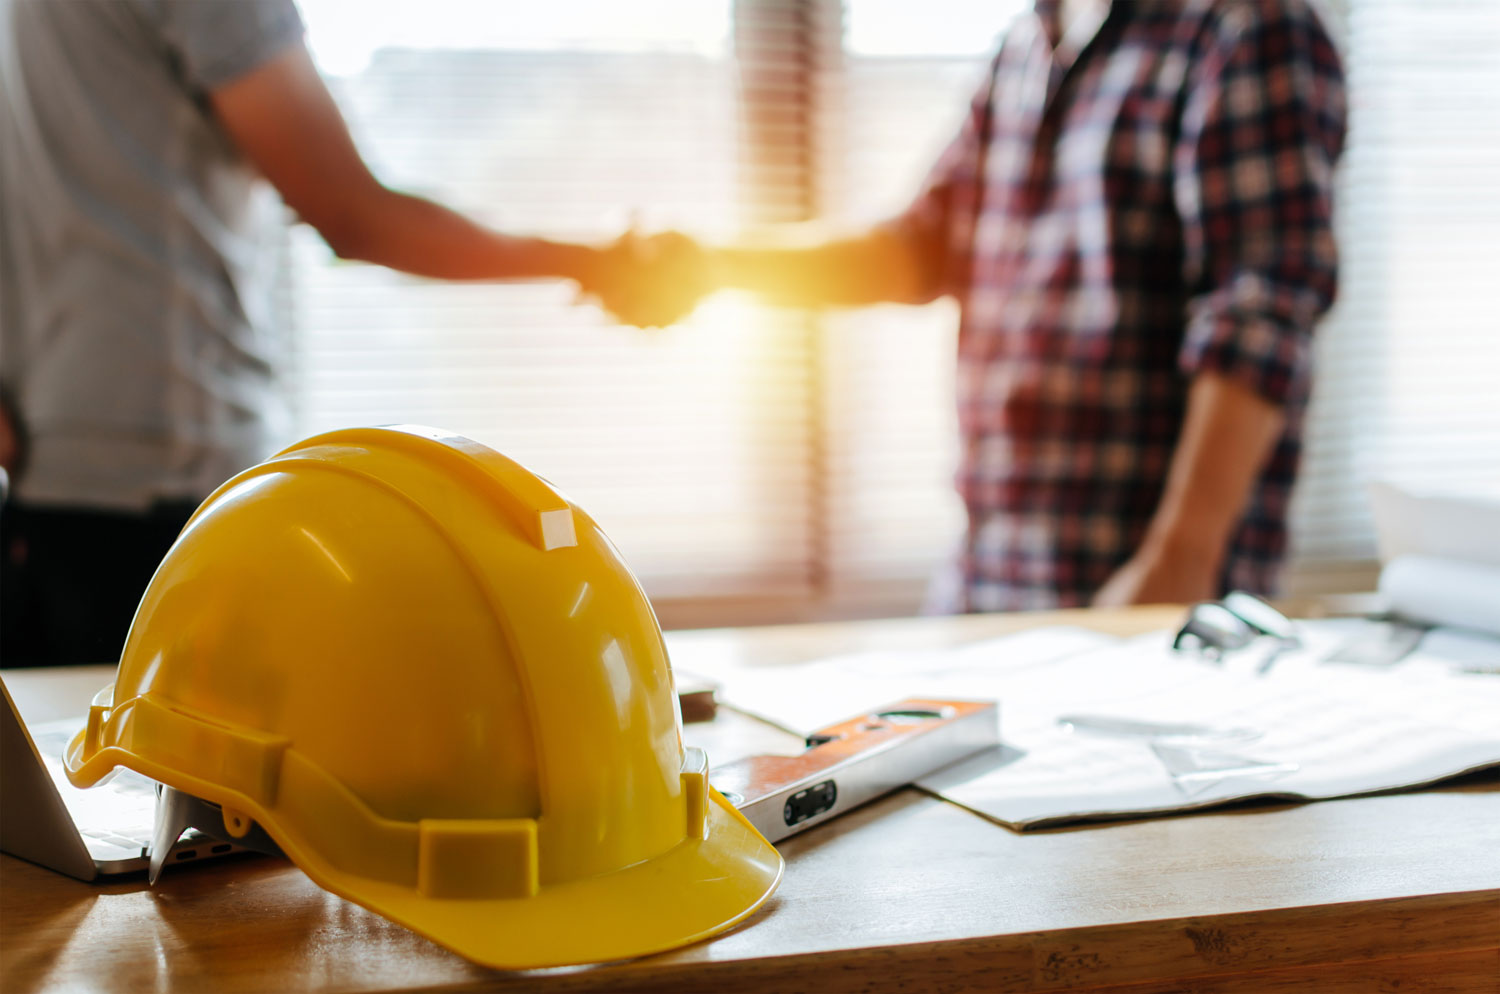 Construction Workers Shaking Hands